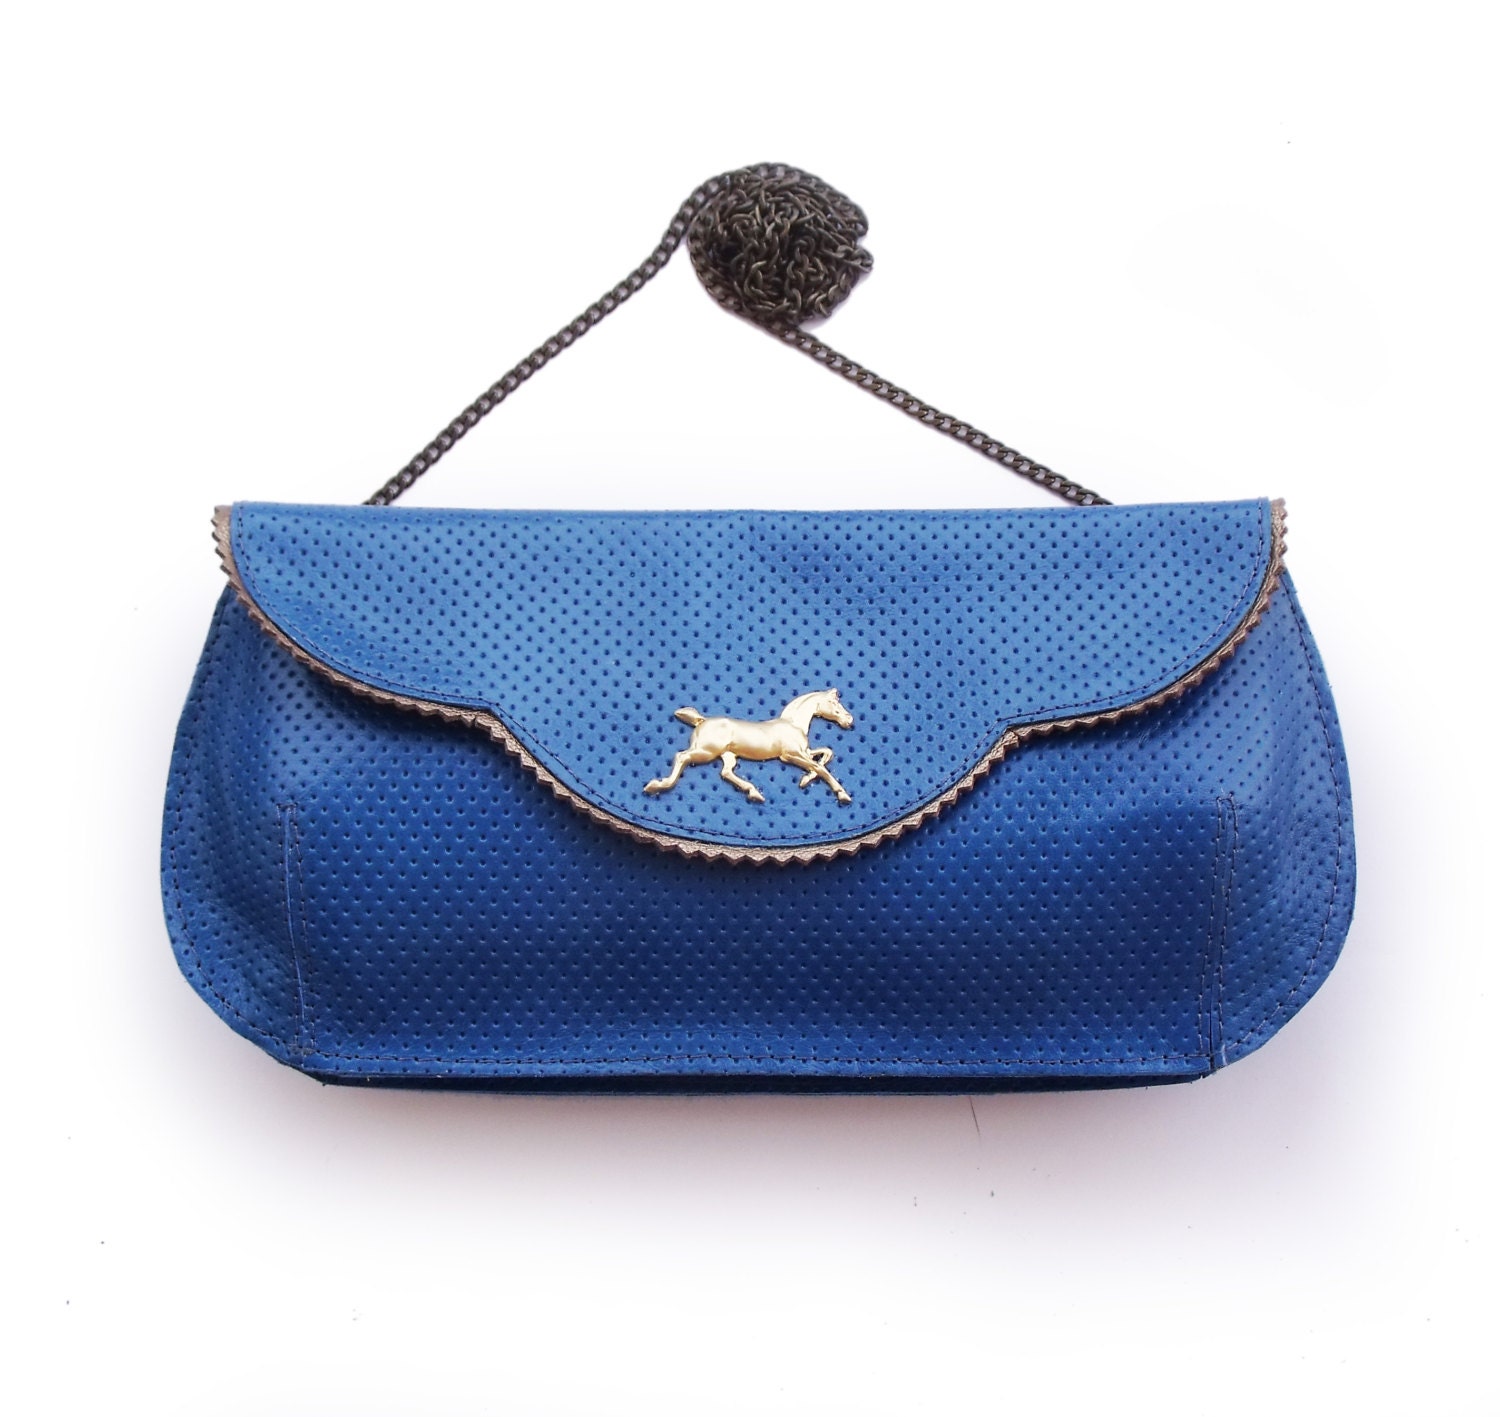 Leather clutch Blue clutch Evening bag Blue by LiberinaBags